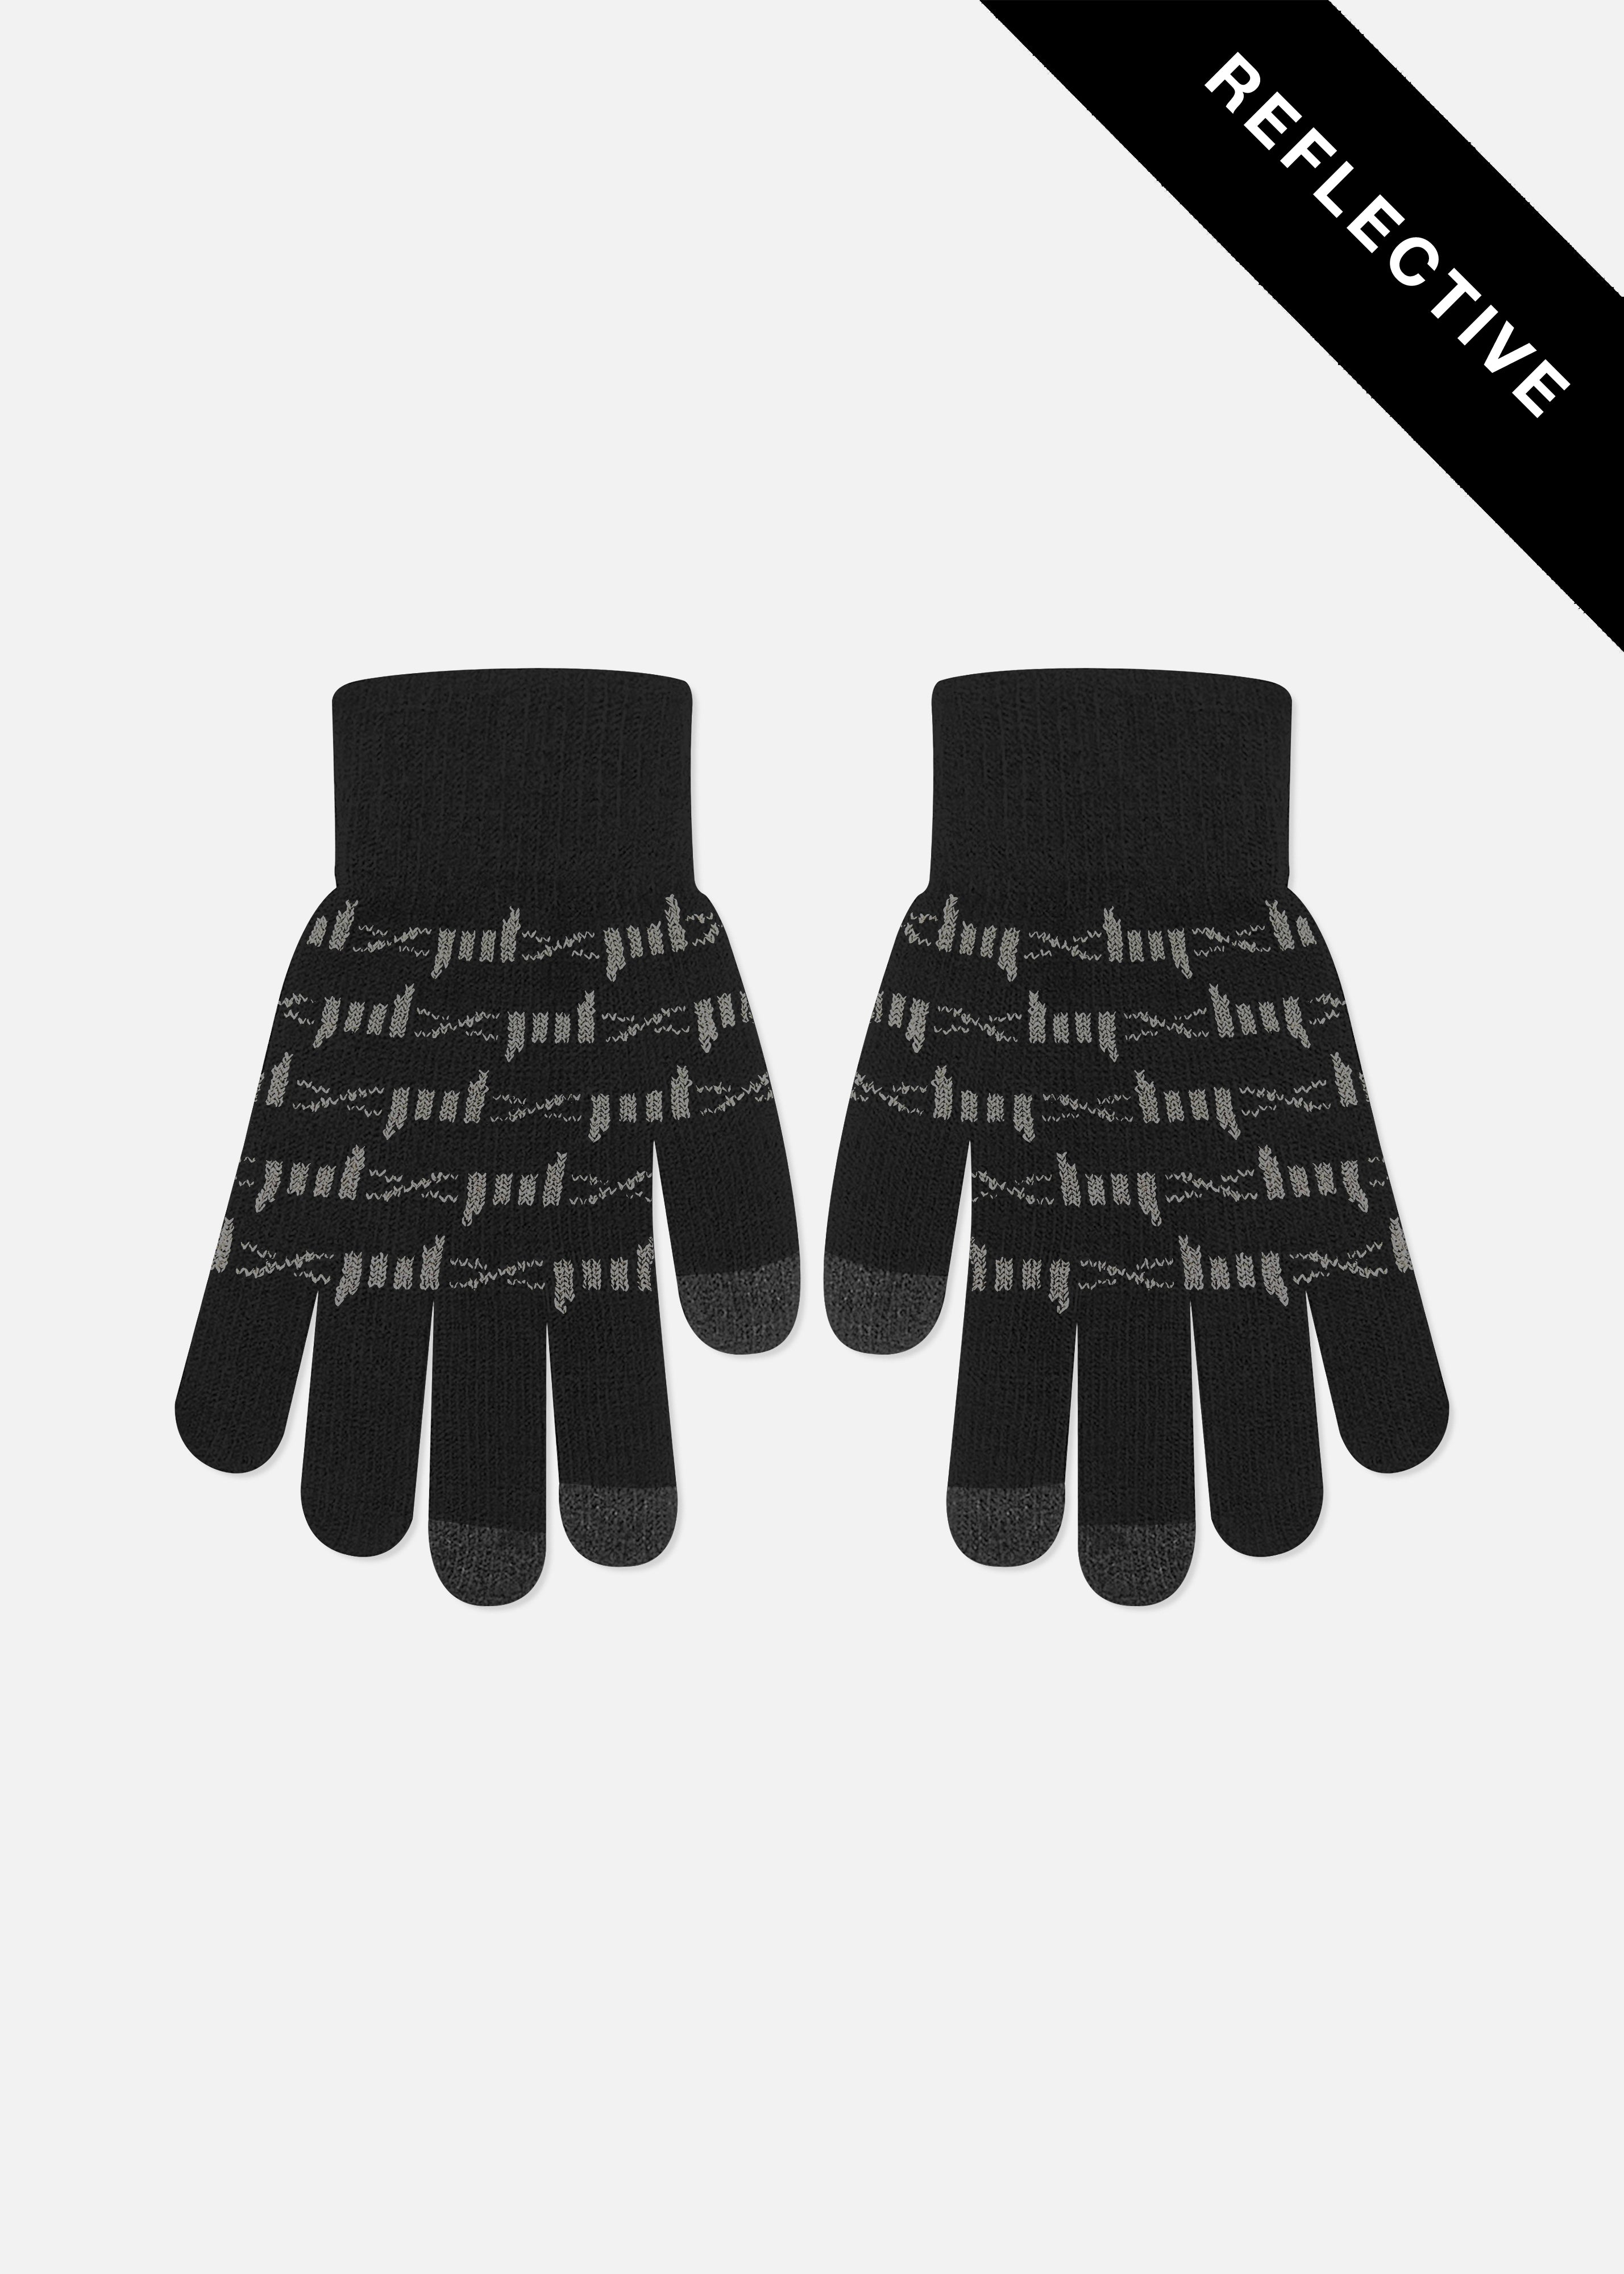 Reflective Barbed Wire Gloves – Black S/M